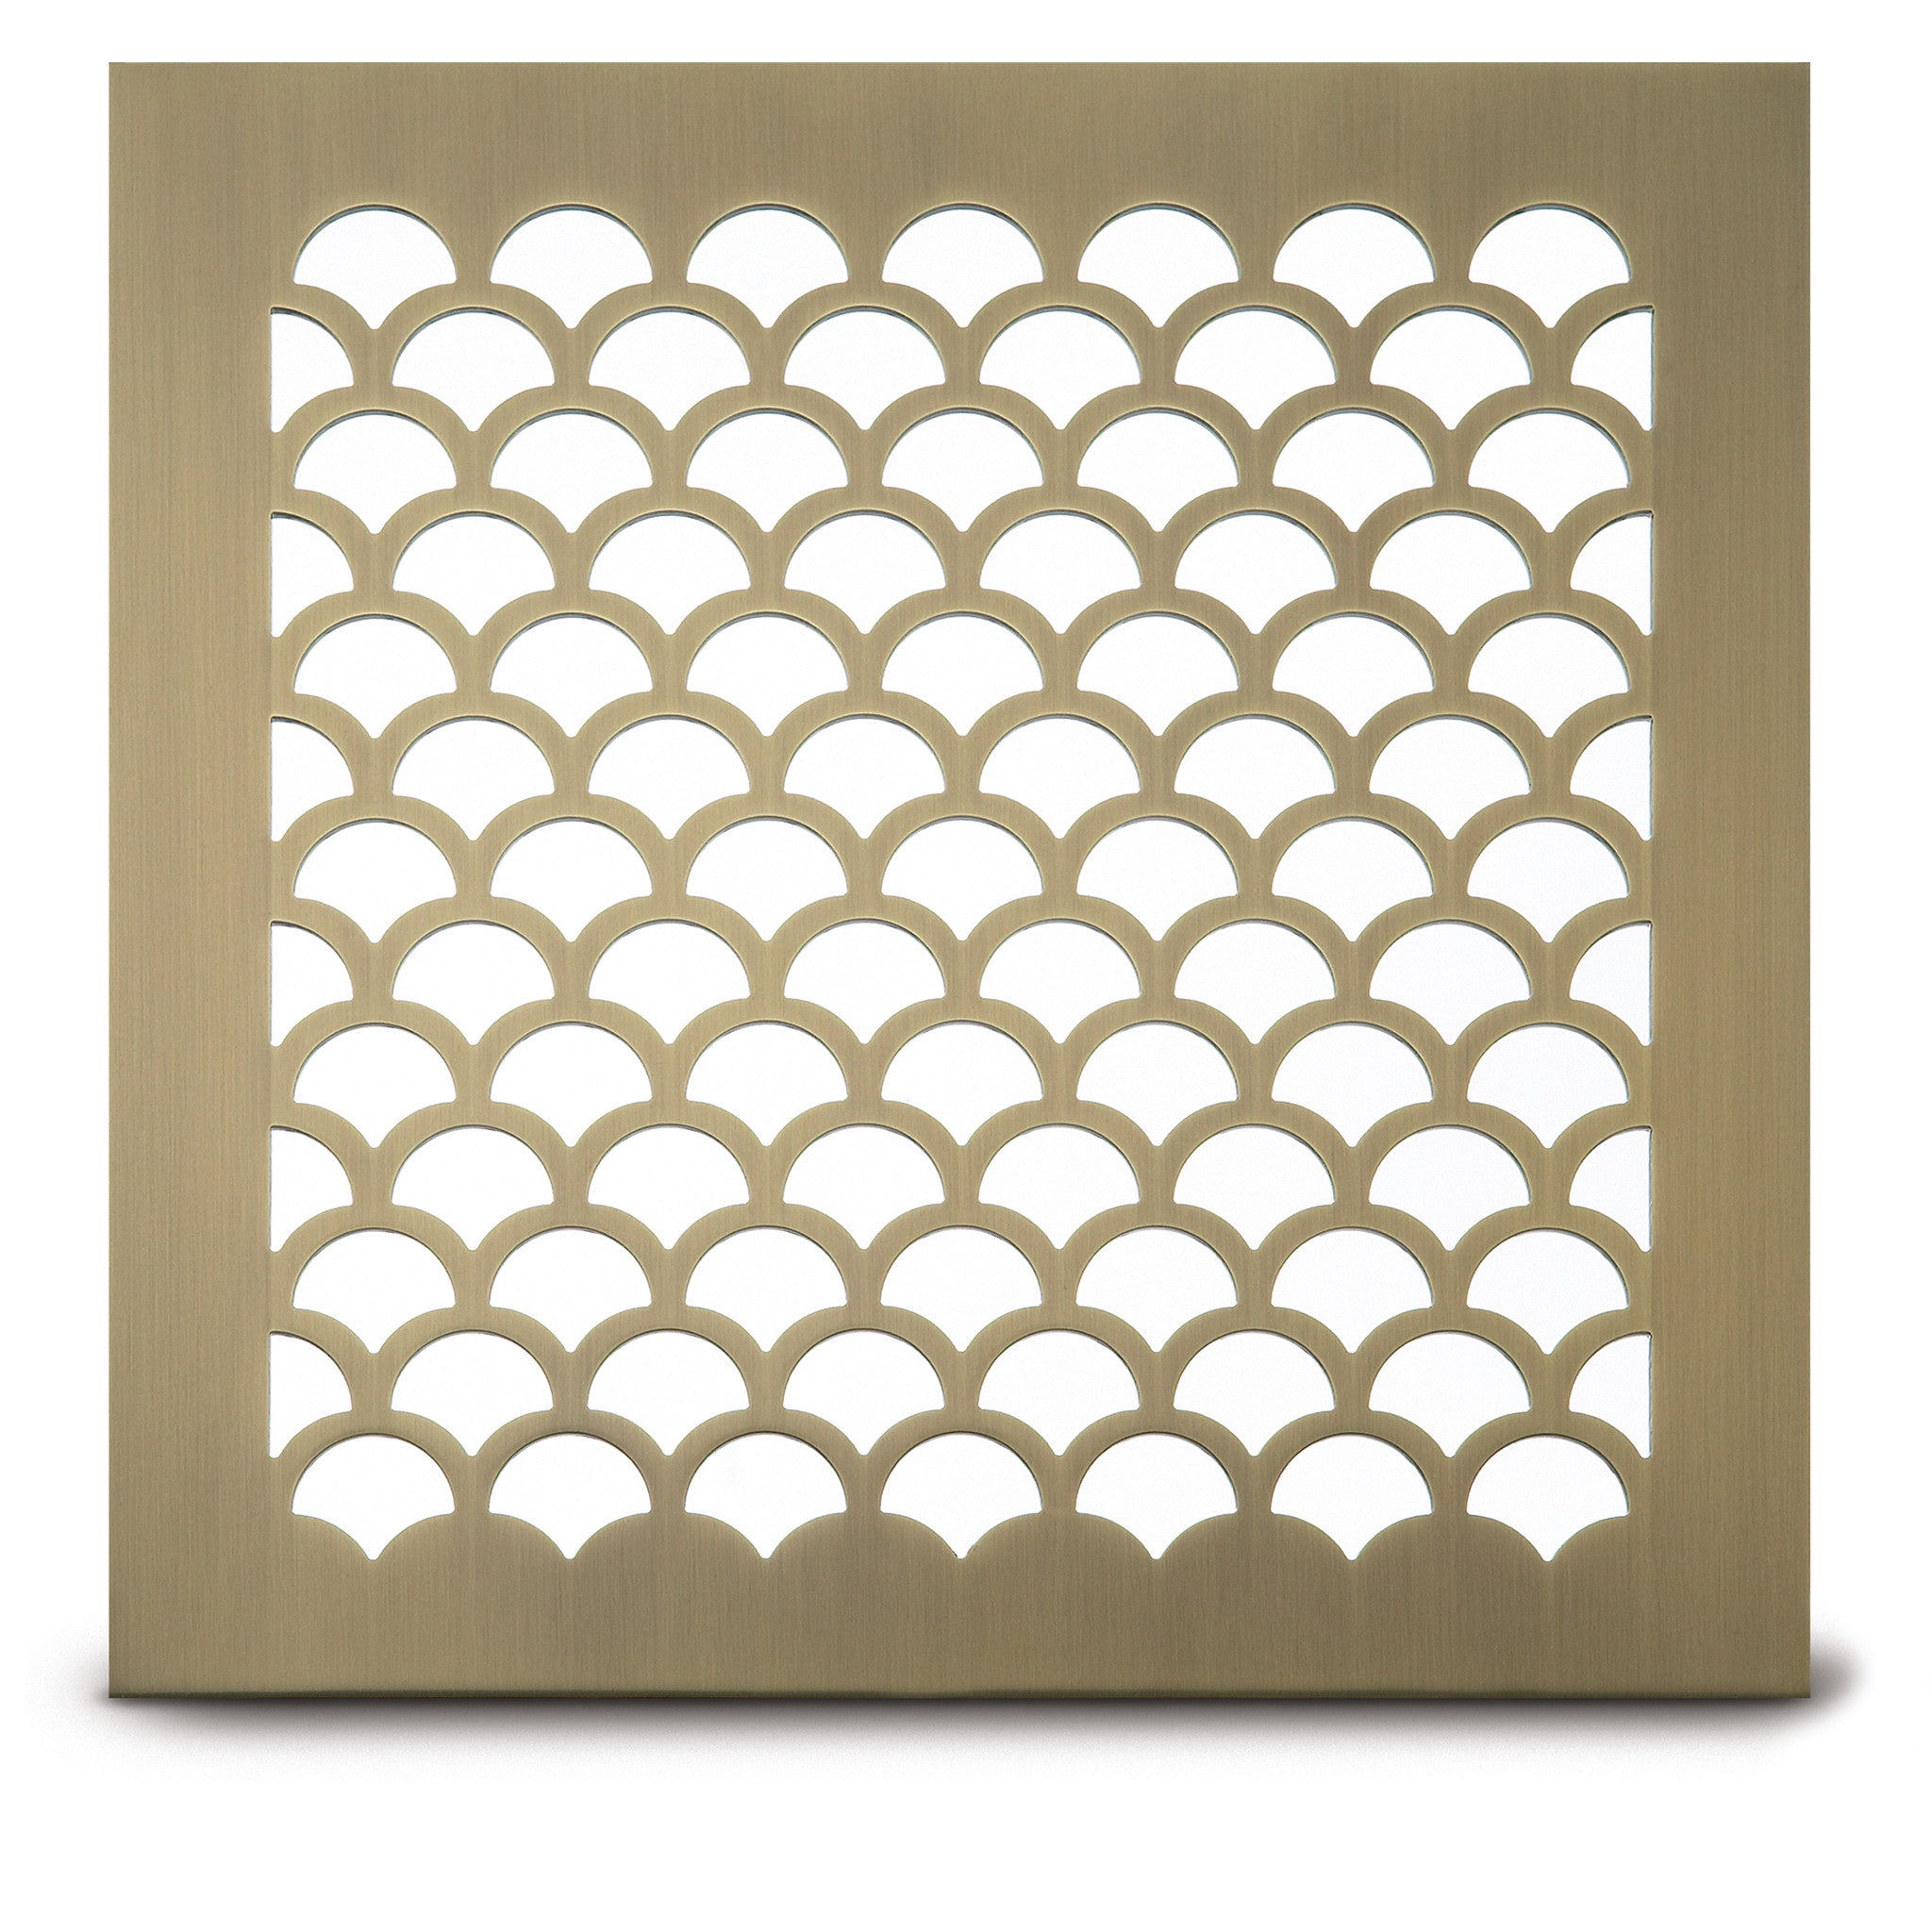 207 Shell Perforated Grille: 1 1/8” pattern - 56% open area